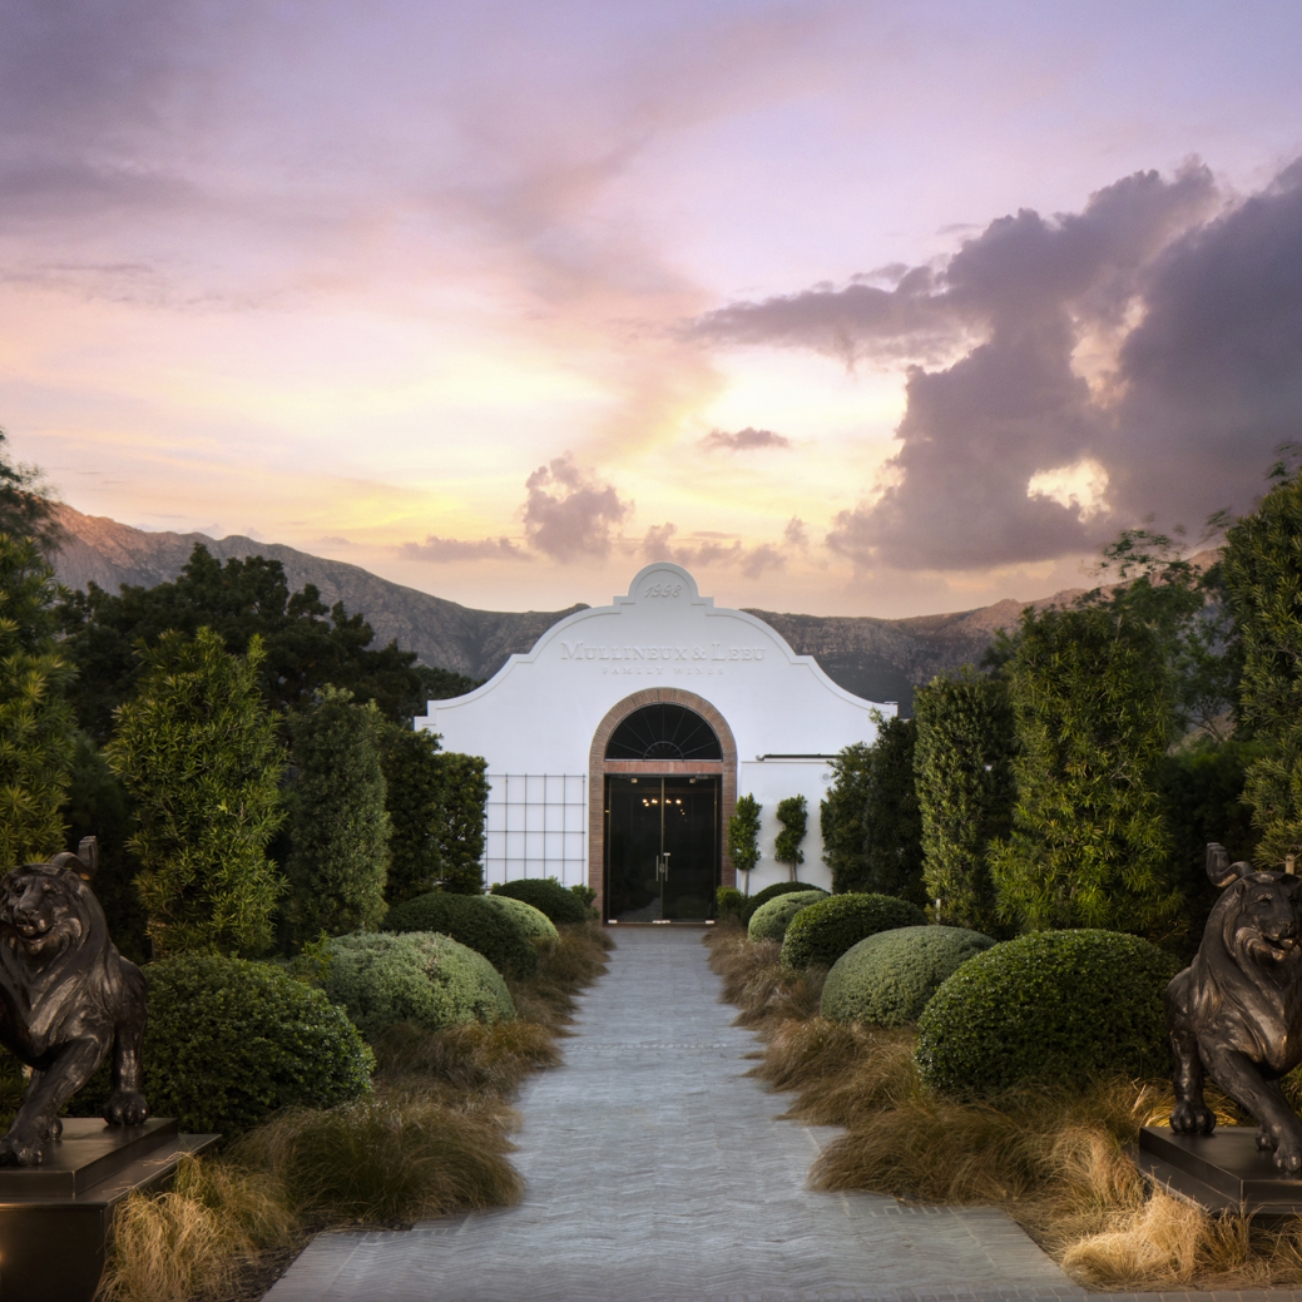 Leeucollection blog - 5 Things to Do at Leeu Estates in Franschhoek 3